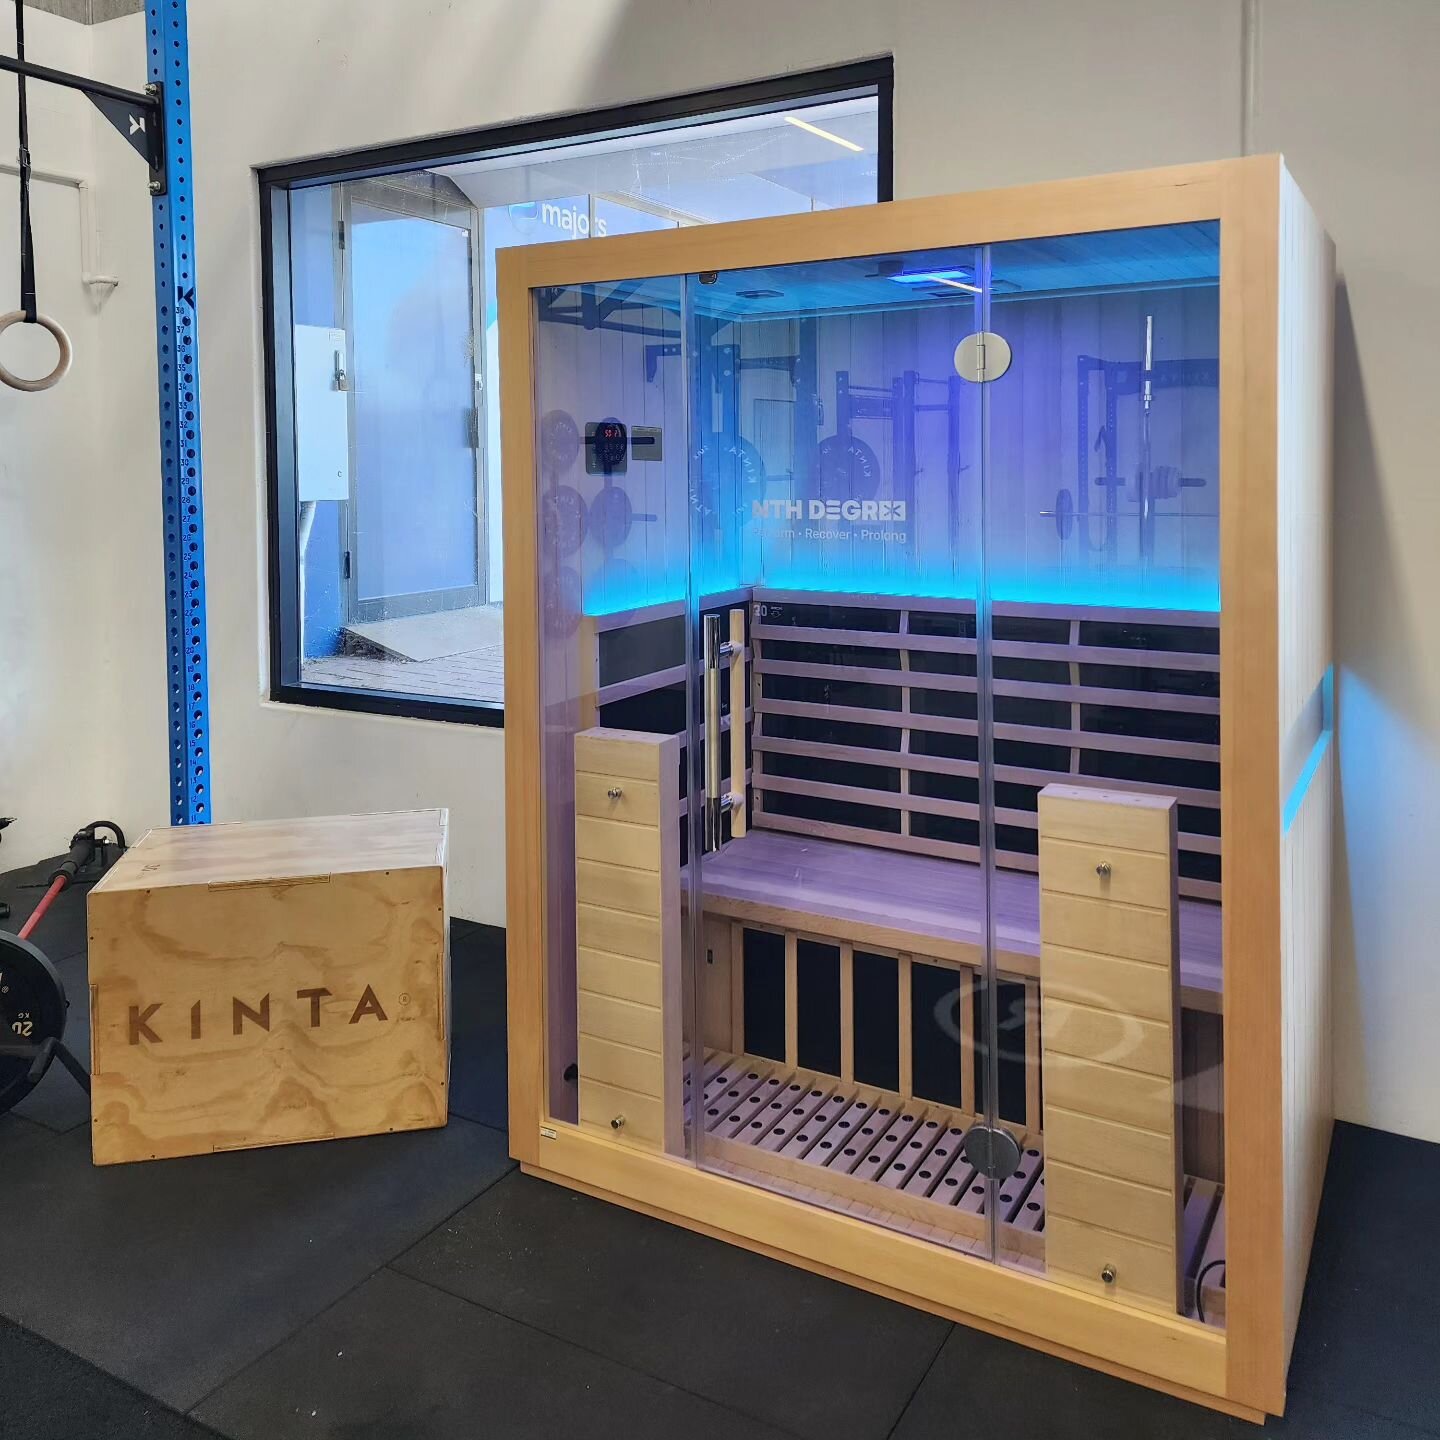 We're super excited to announce our new official stockist of our premium saunas and ice baths 🥁 🥁 🥁 @kinta.fitness in Malaga.

Joe and the team at Kinta can now offer top quality and value recovery in addition to their awesome range of home and co